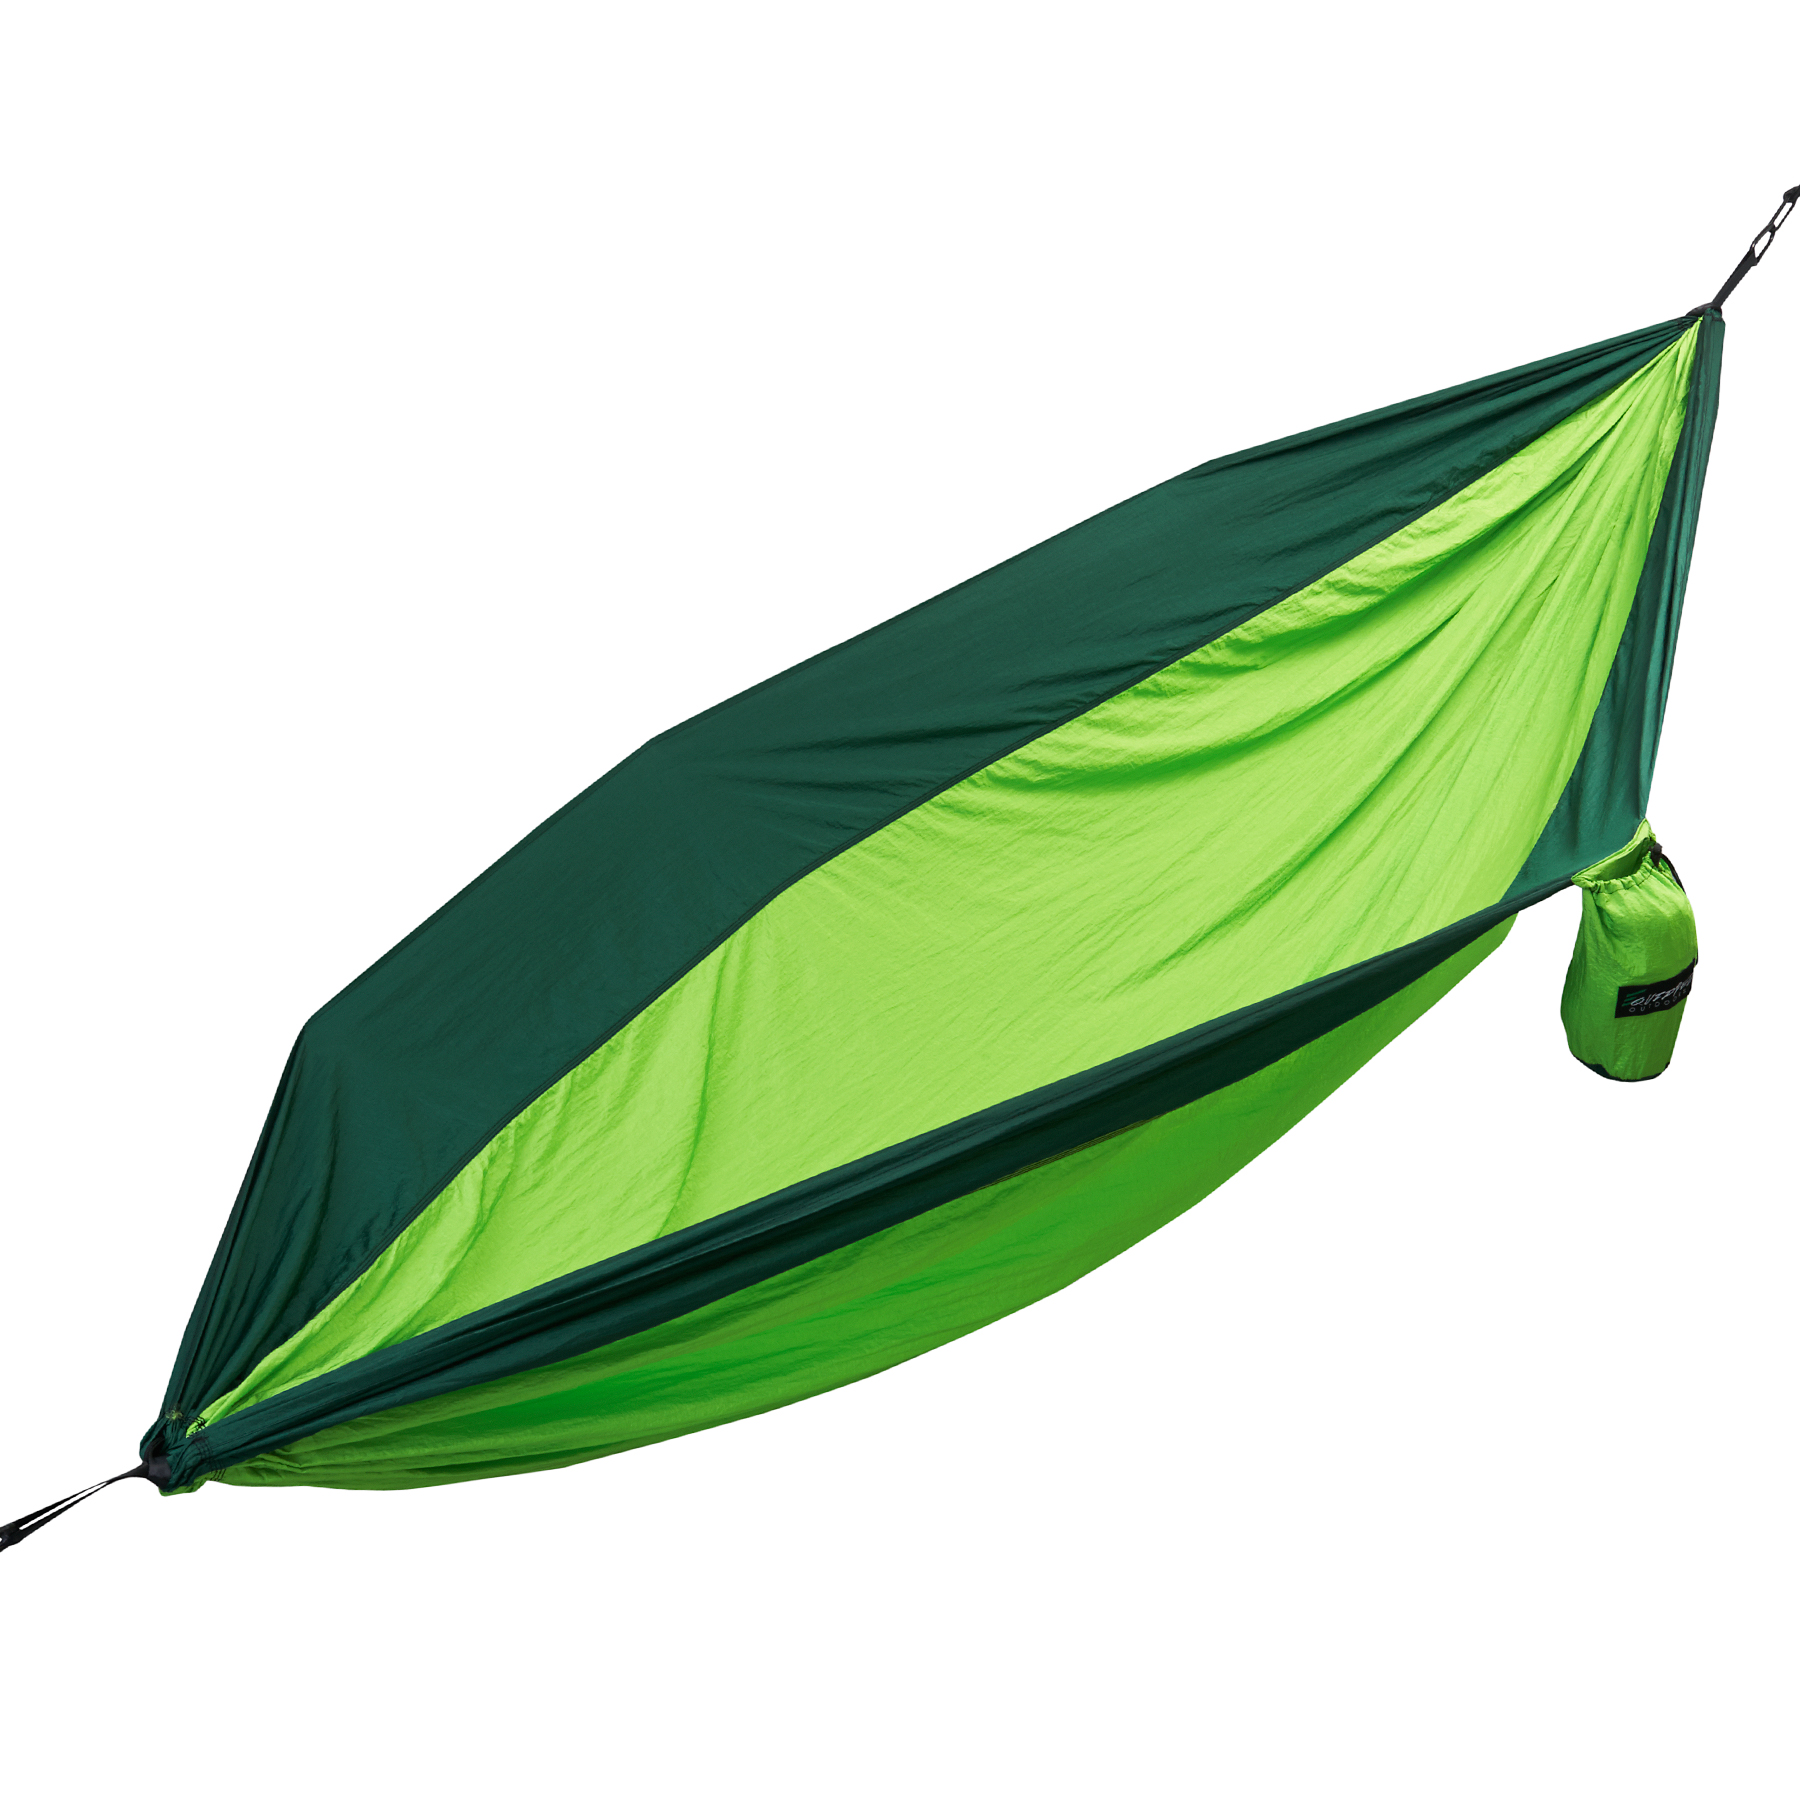 Large Two Person Parachute Camping Hammock with Nautical Grade Tree Ropes - image 1 of 2